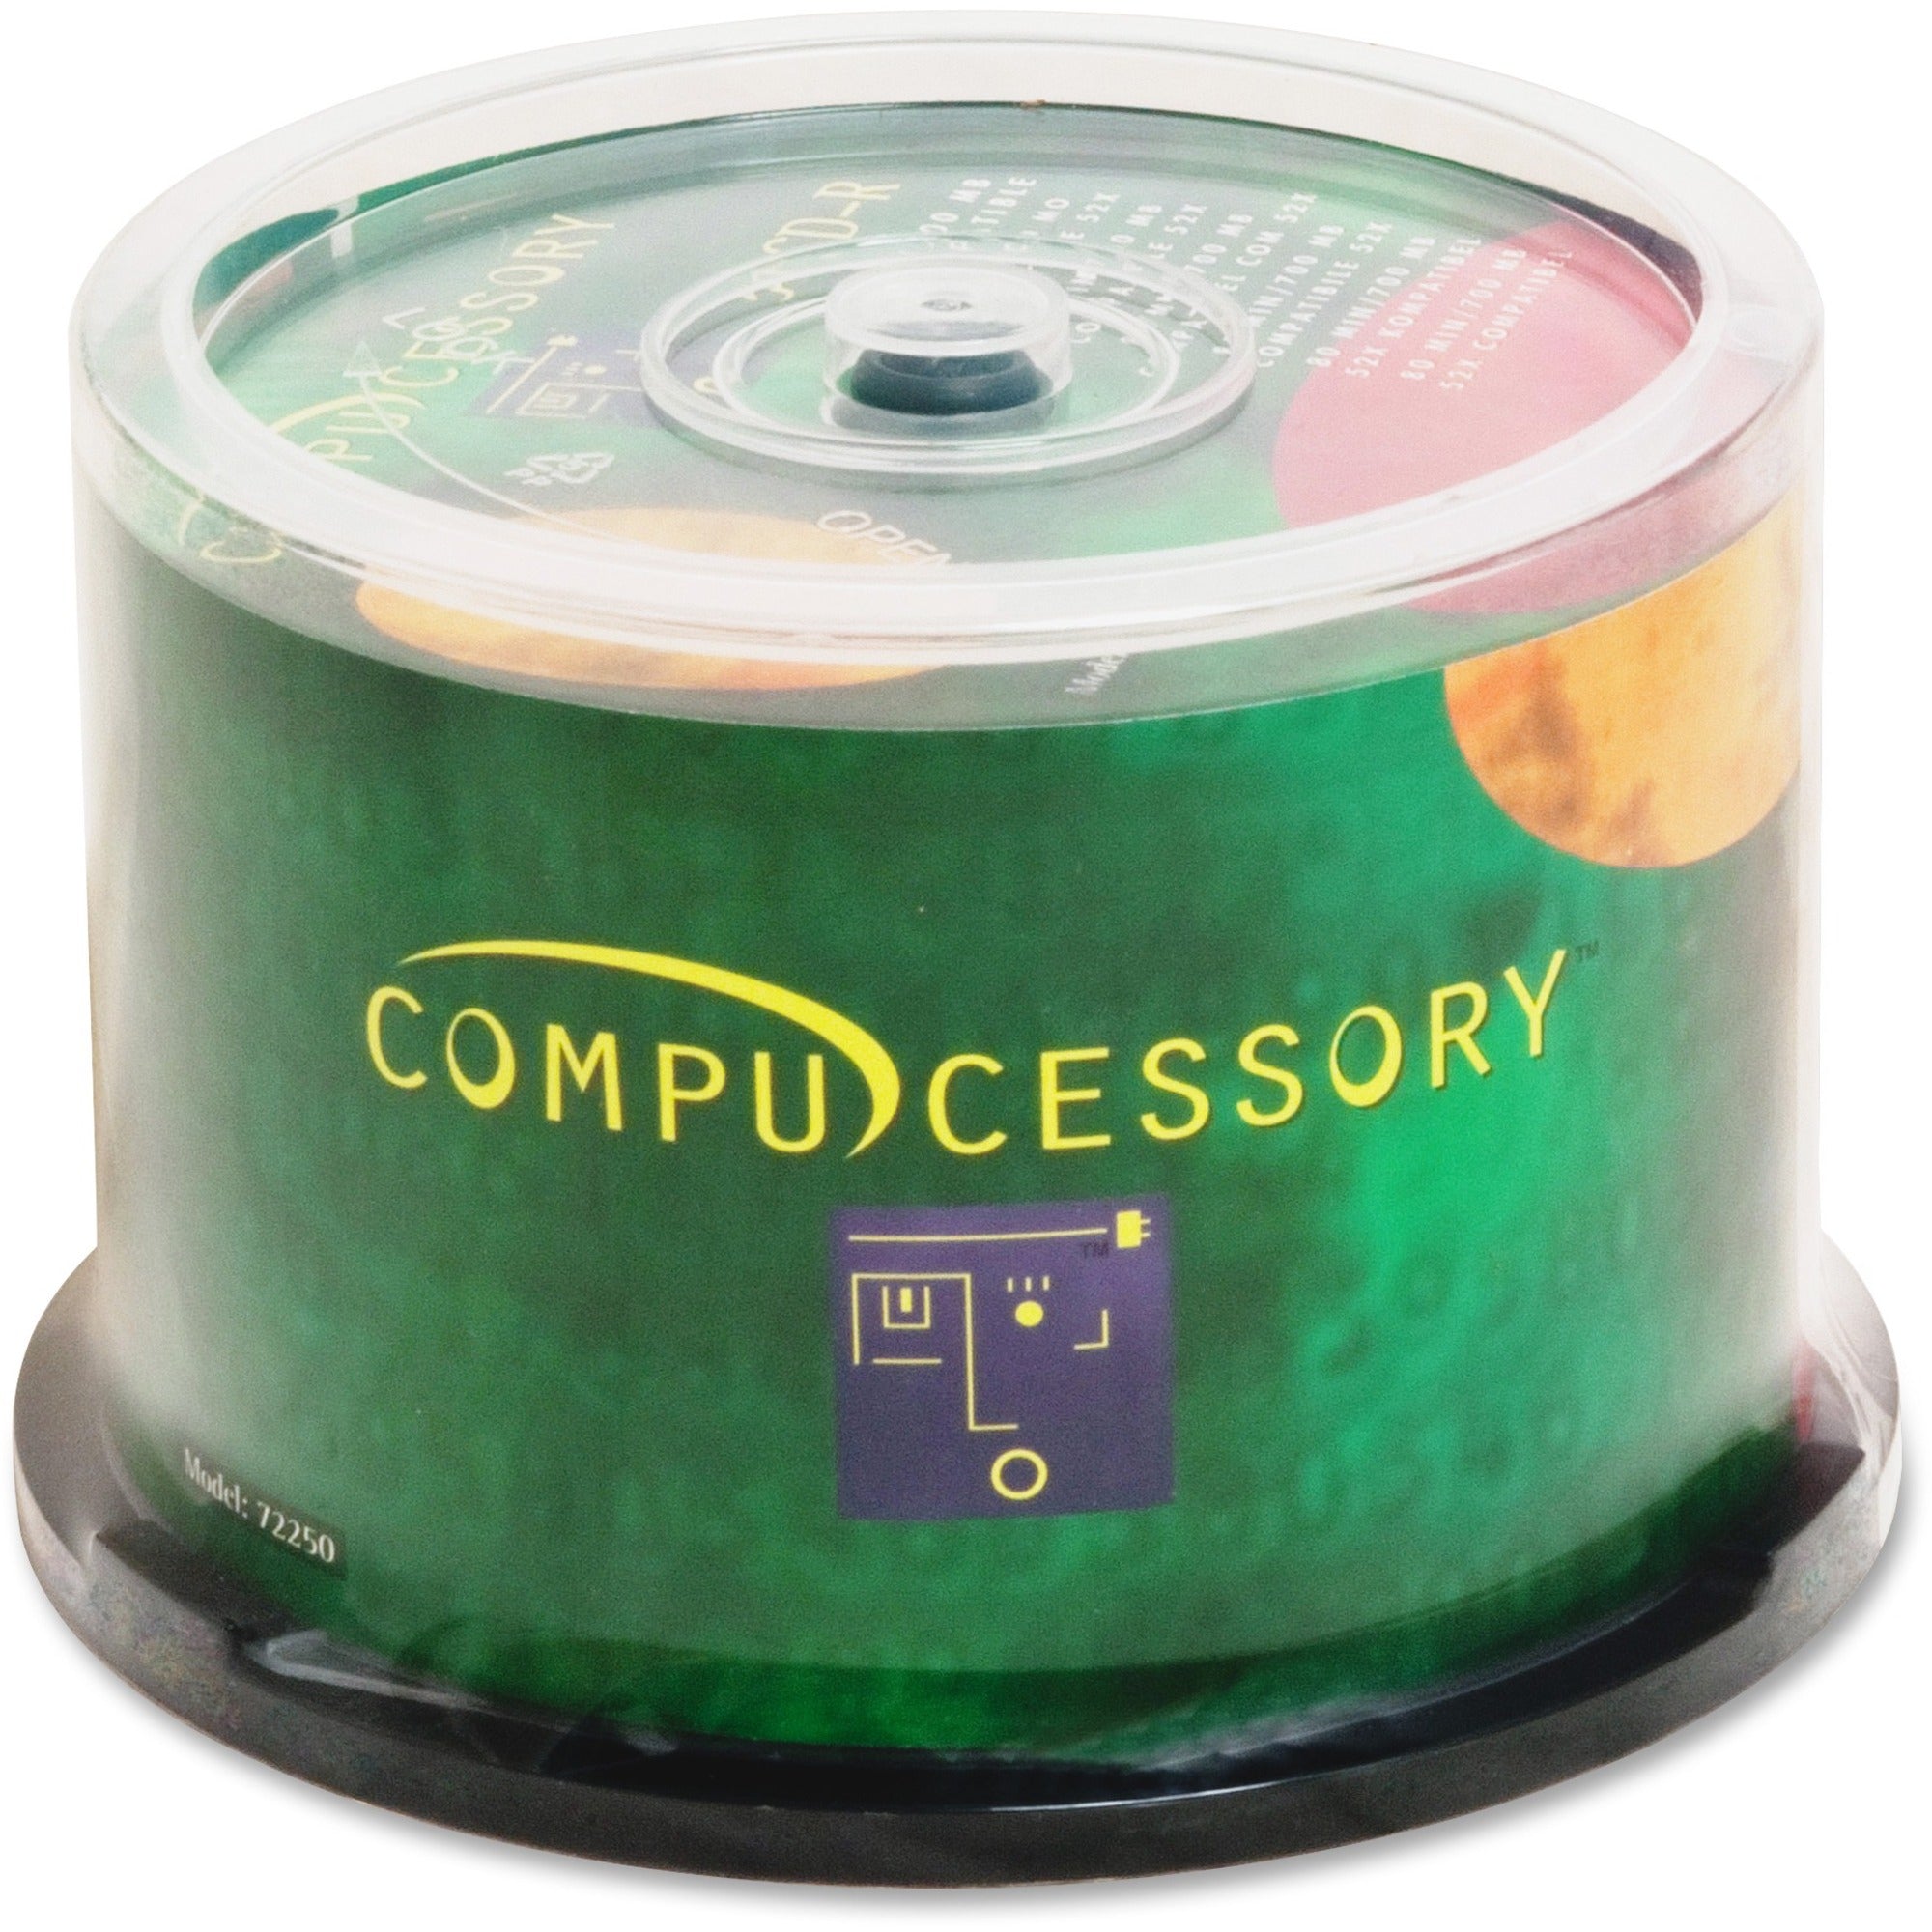 Compucessory CD Recordable Media - CD-R - 52x - 700 MB - 50 Pack Spindle - 120mm - 1.33 Hour Maximum Recording Time - 